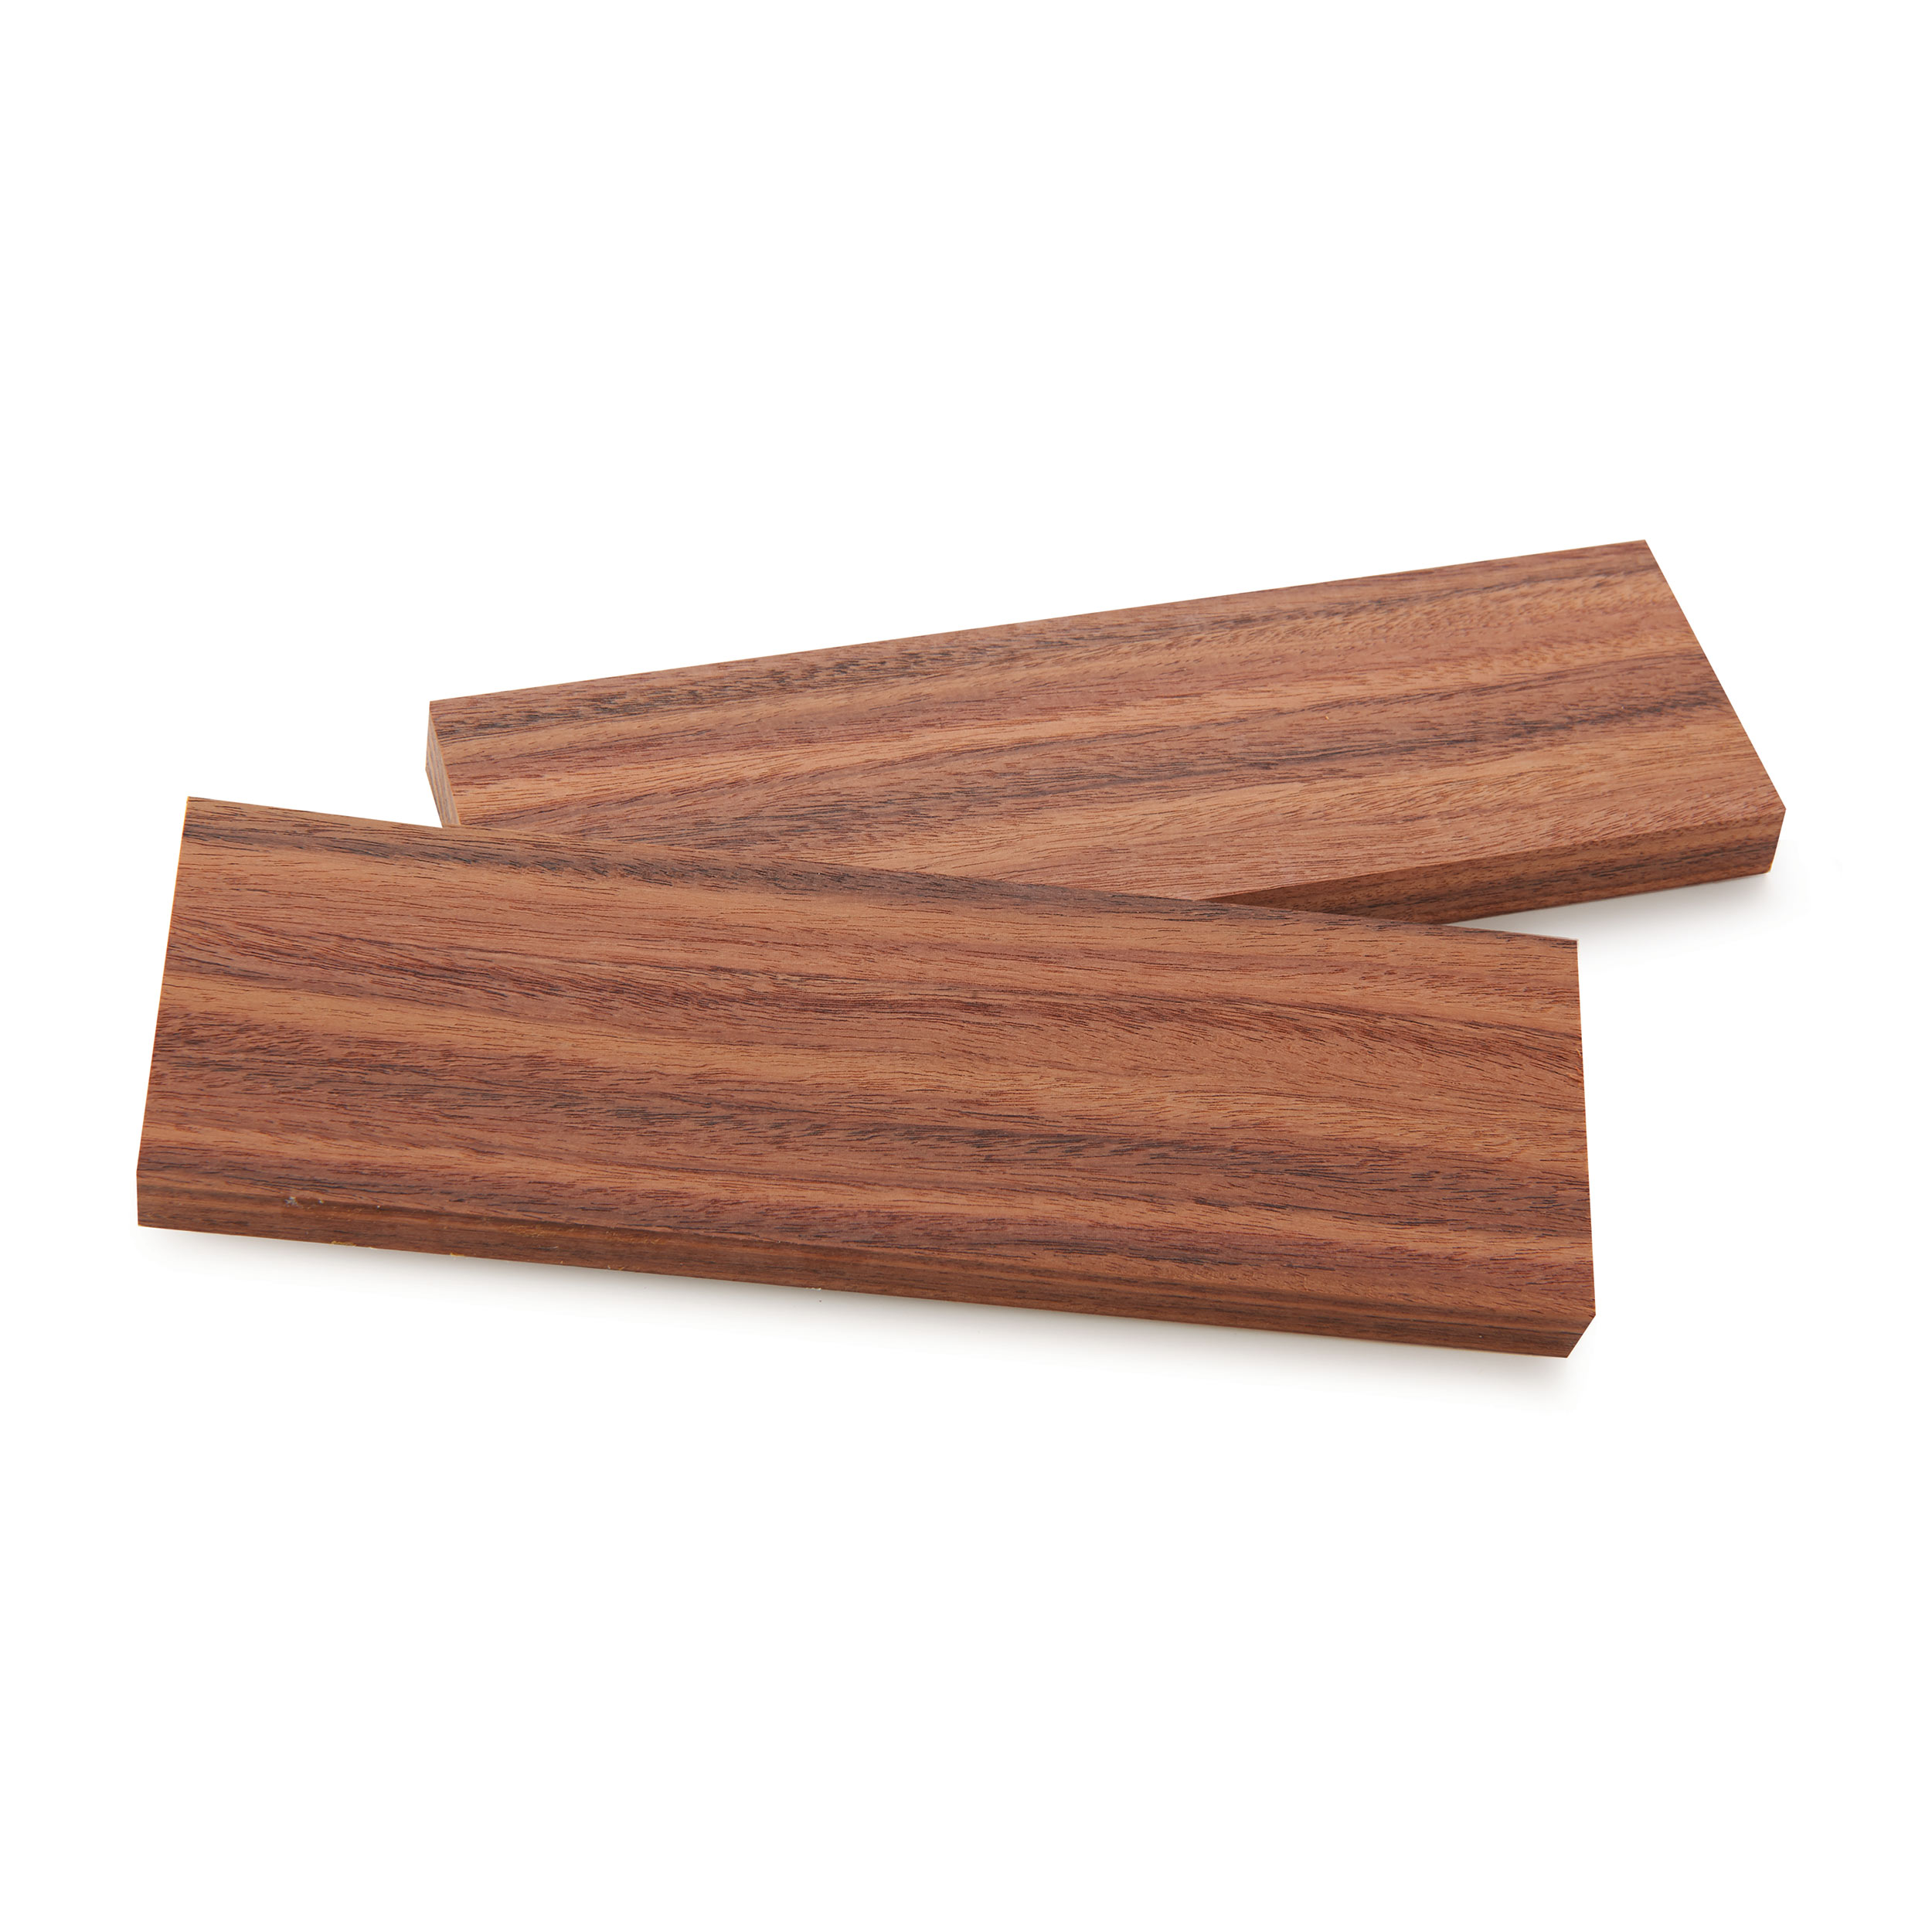 Rosewood, Bolivian 3/8" X 1.5" X 5" Knife Scale 2pc